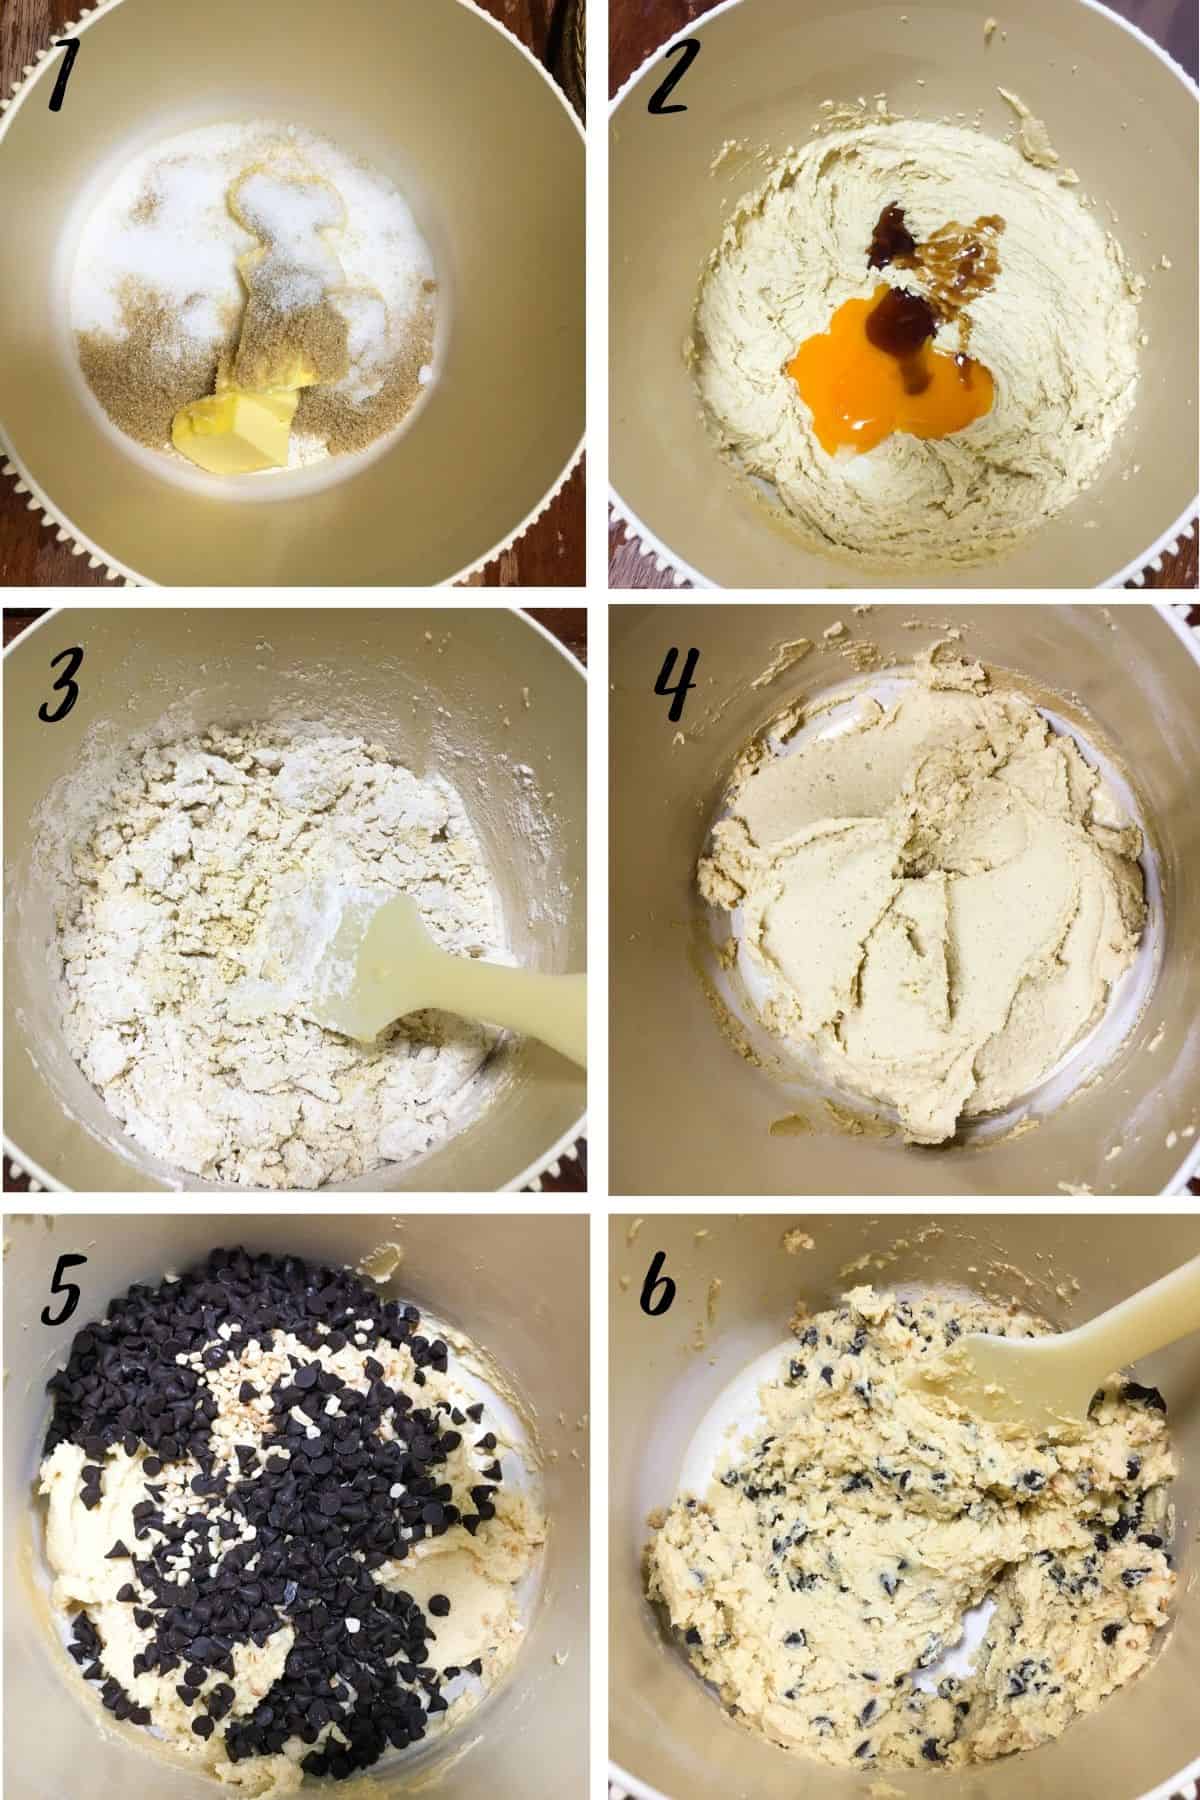 A poster of 6 images showing how to mix dough.